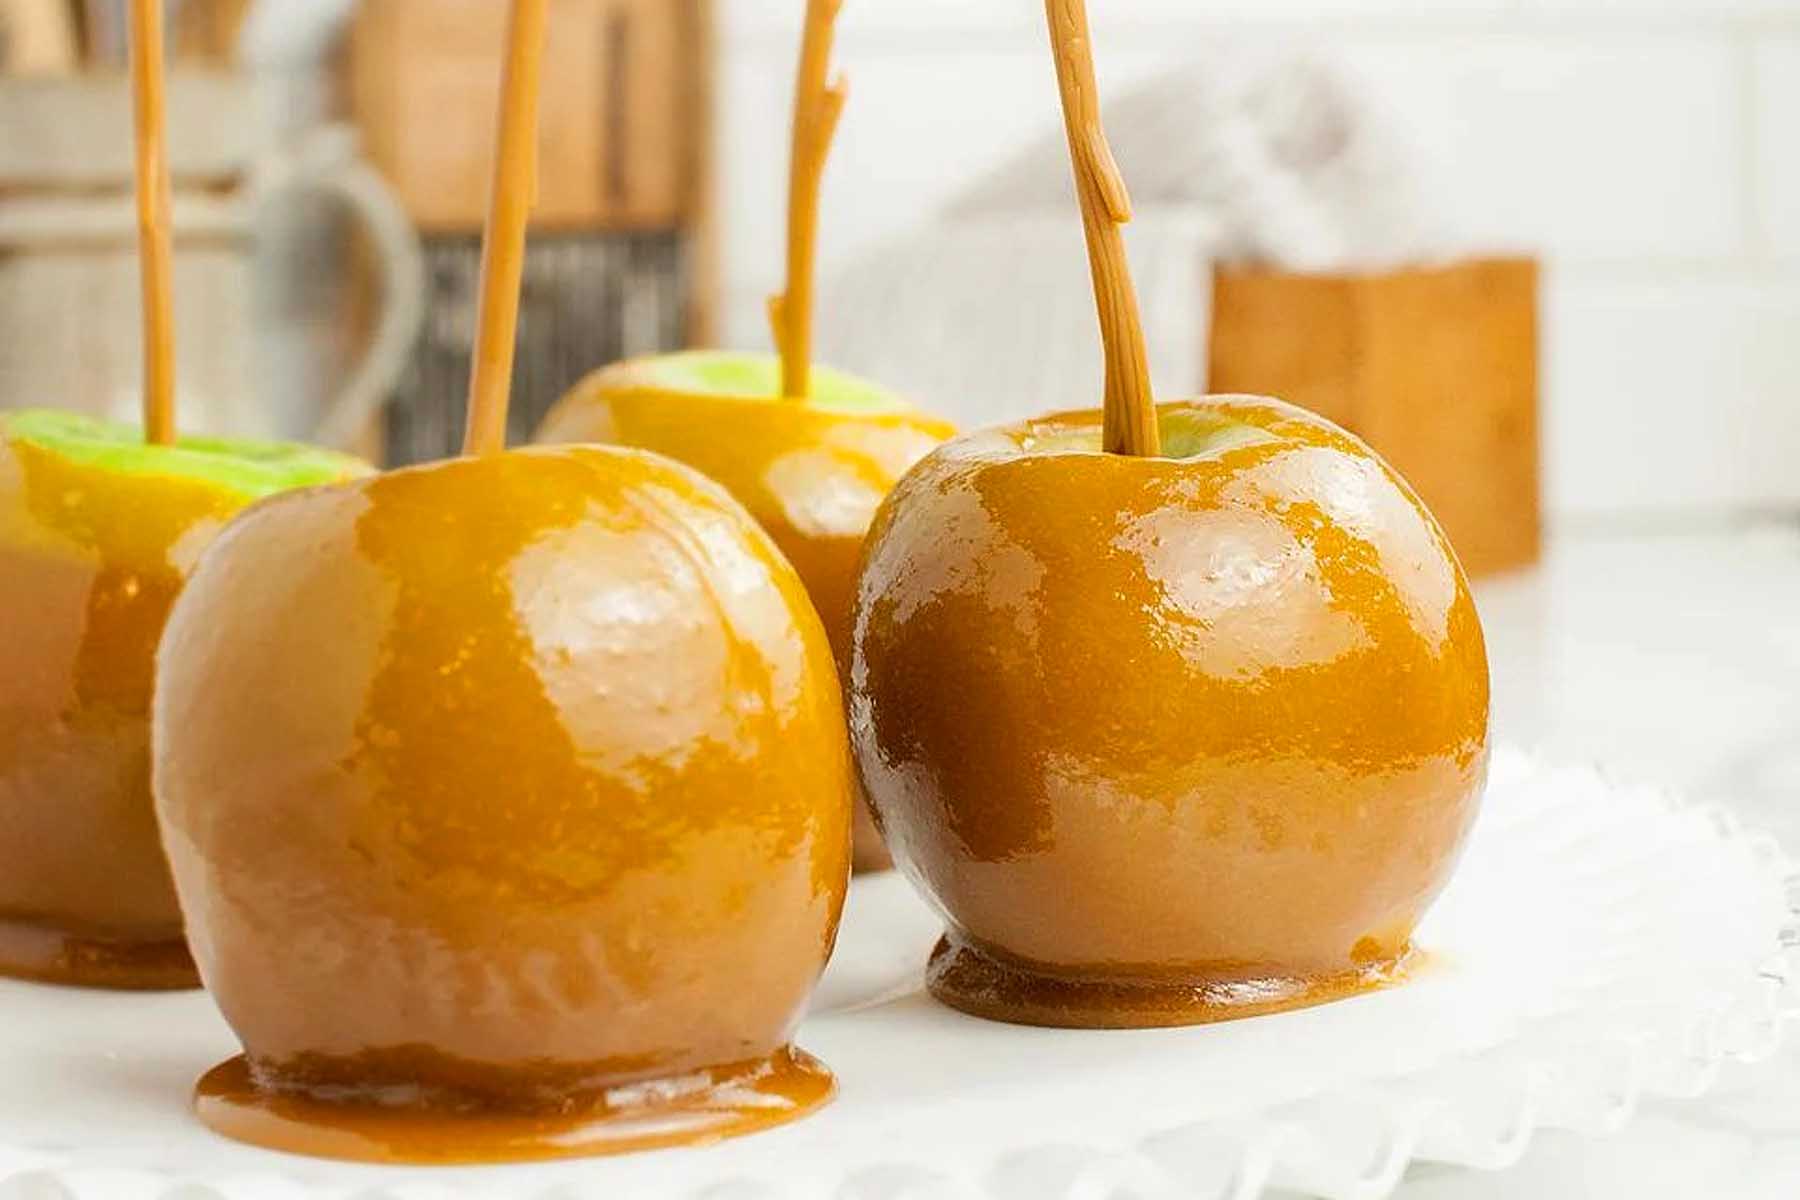 Caramel apples with caramel sauce on a plate. Add this to your list of favorite apple recipes.